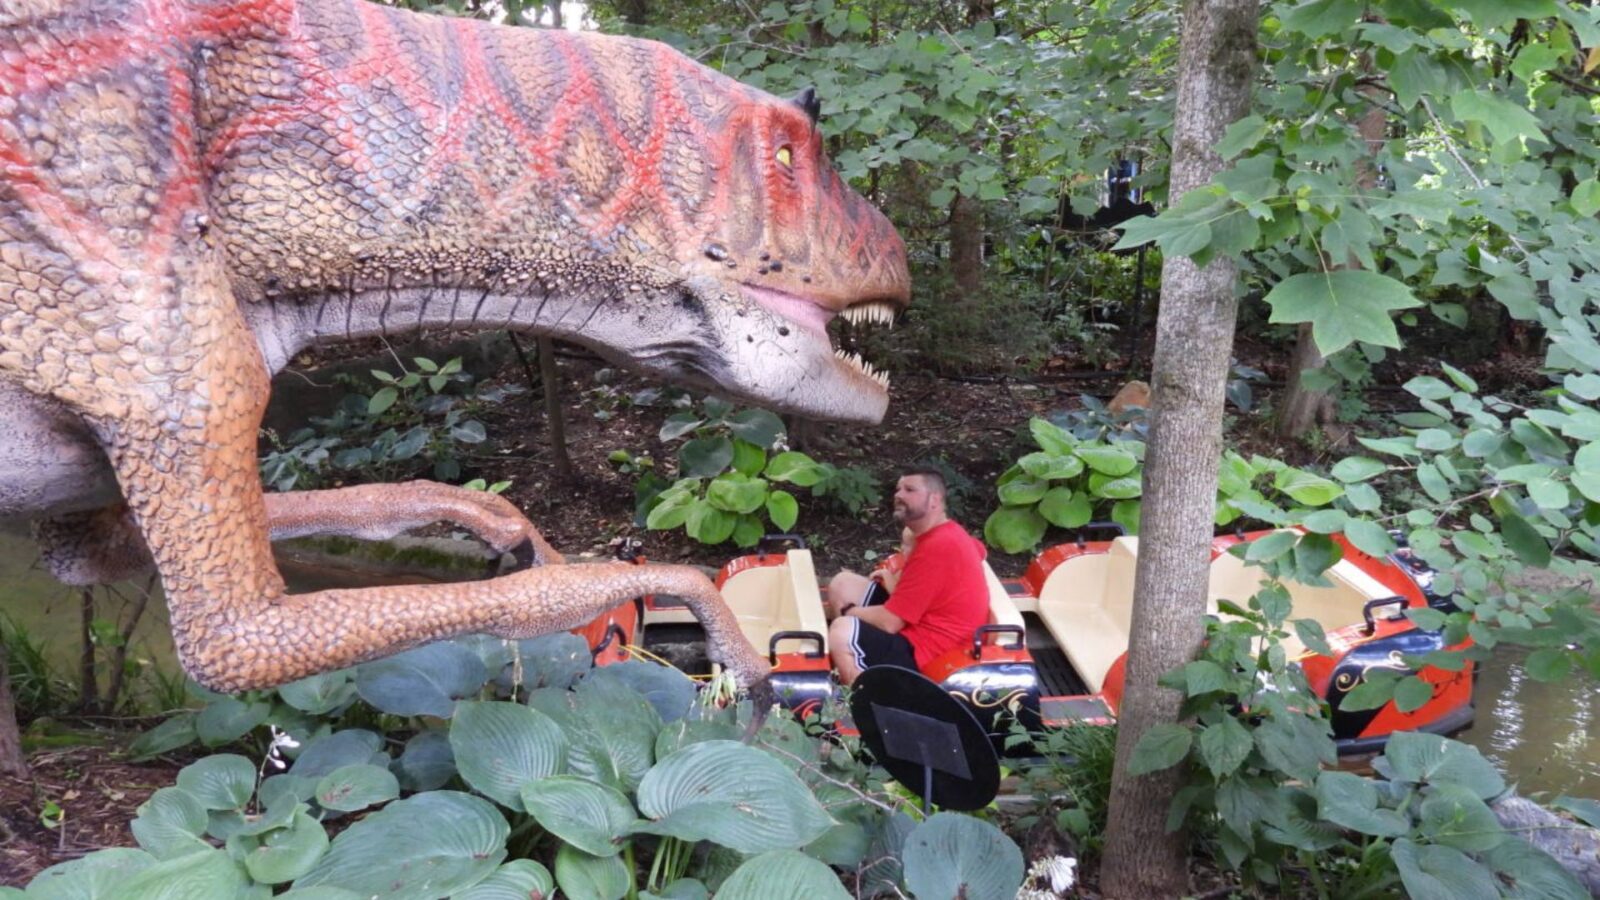 Passengers on boats encounter dinosaurs at the Columbus Zoo and Aquarium. Photo by Tim Trudell